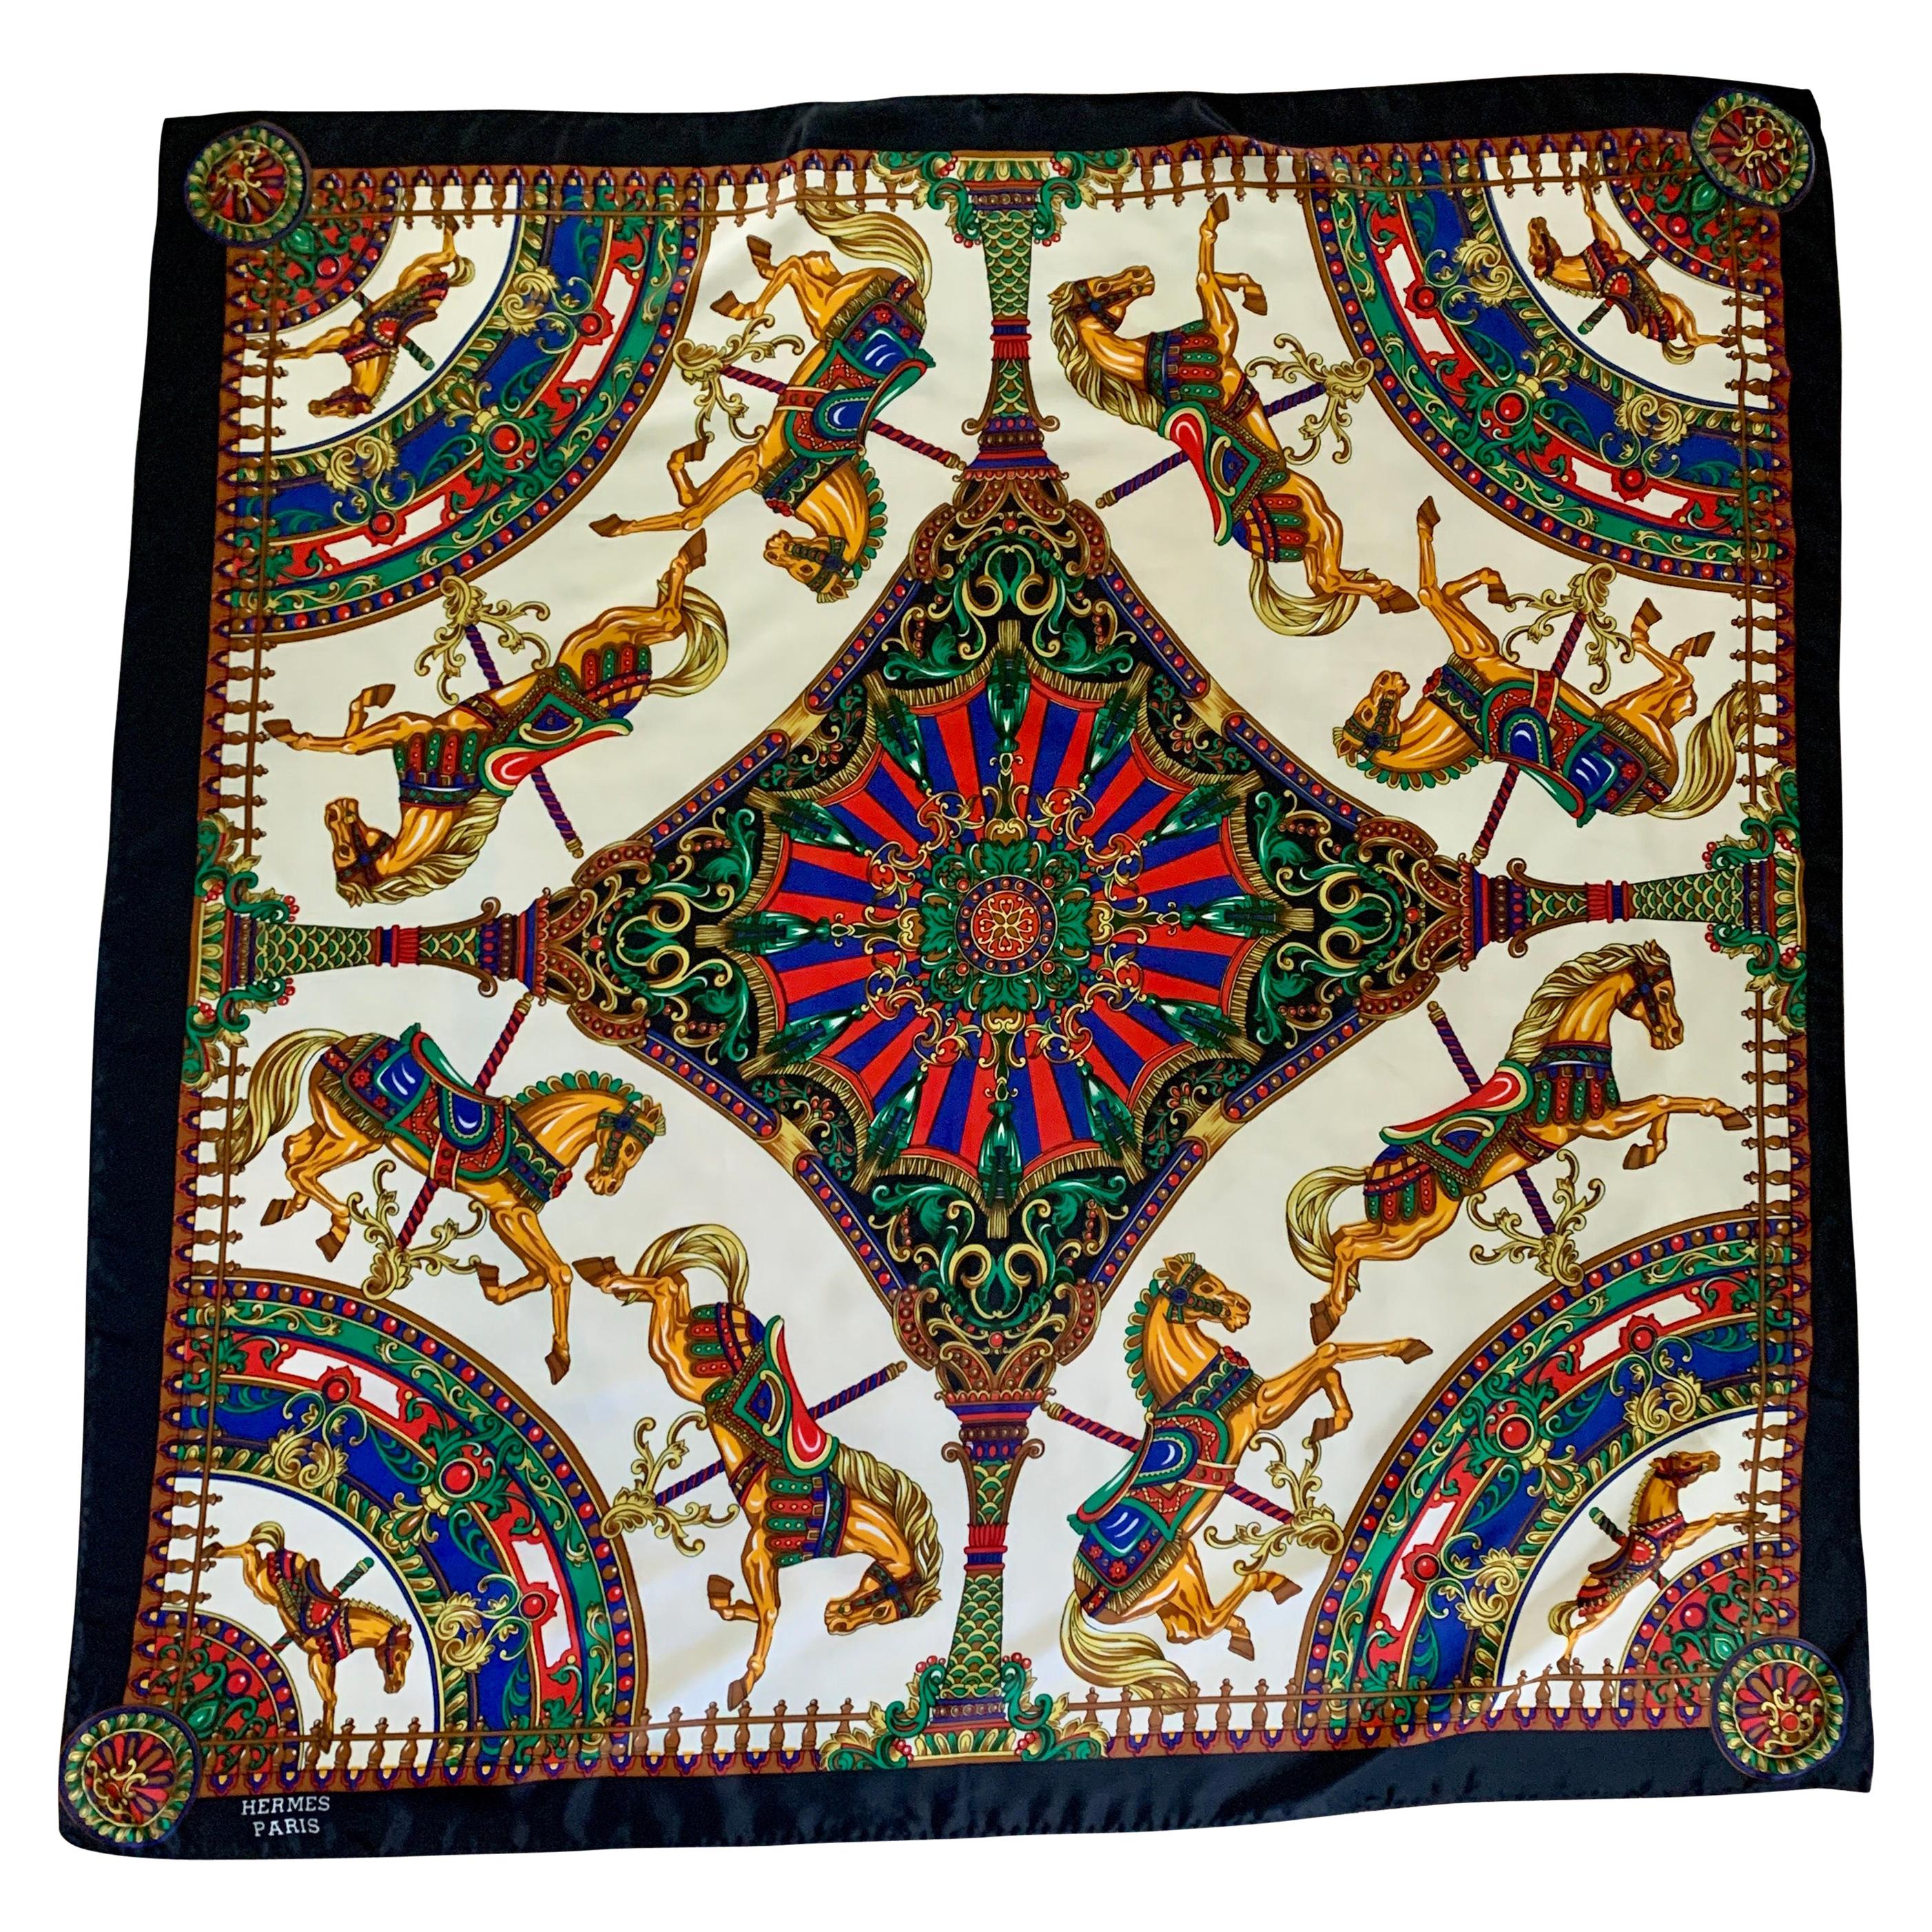 Hermes Paris Silk Scarf with Carousel Horse Pattern